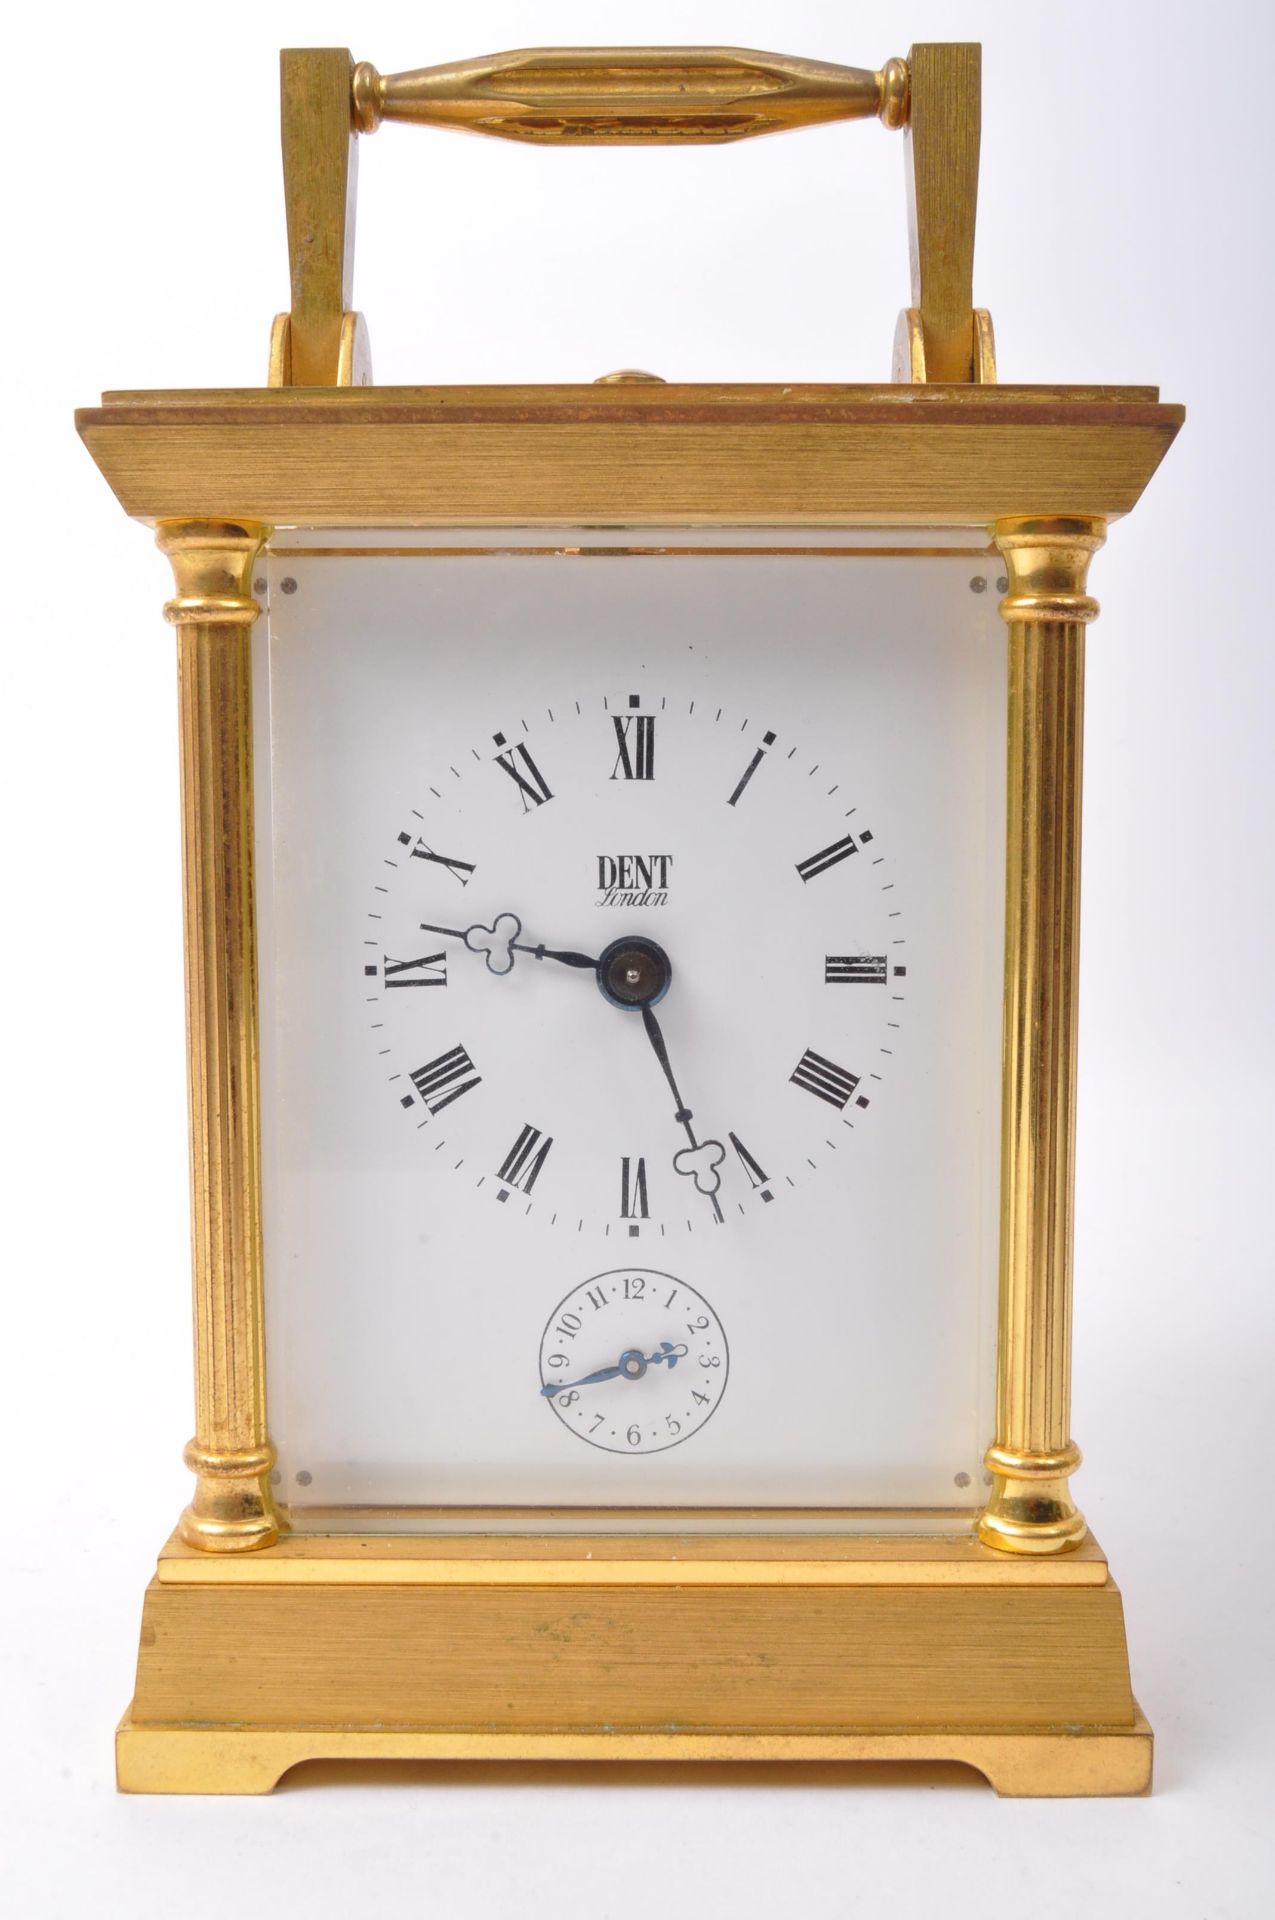 DENT OF LONDON - BRASS GILDED CARRIAGE CLOCK